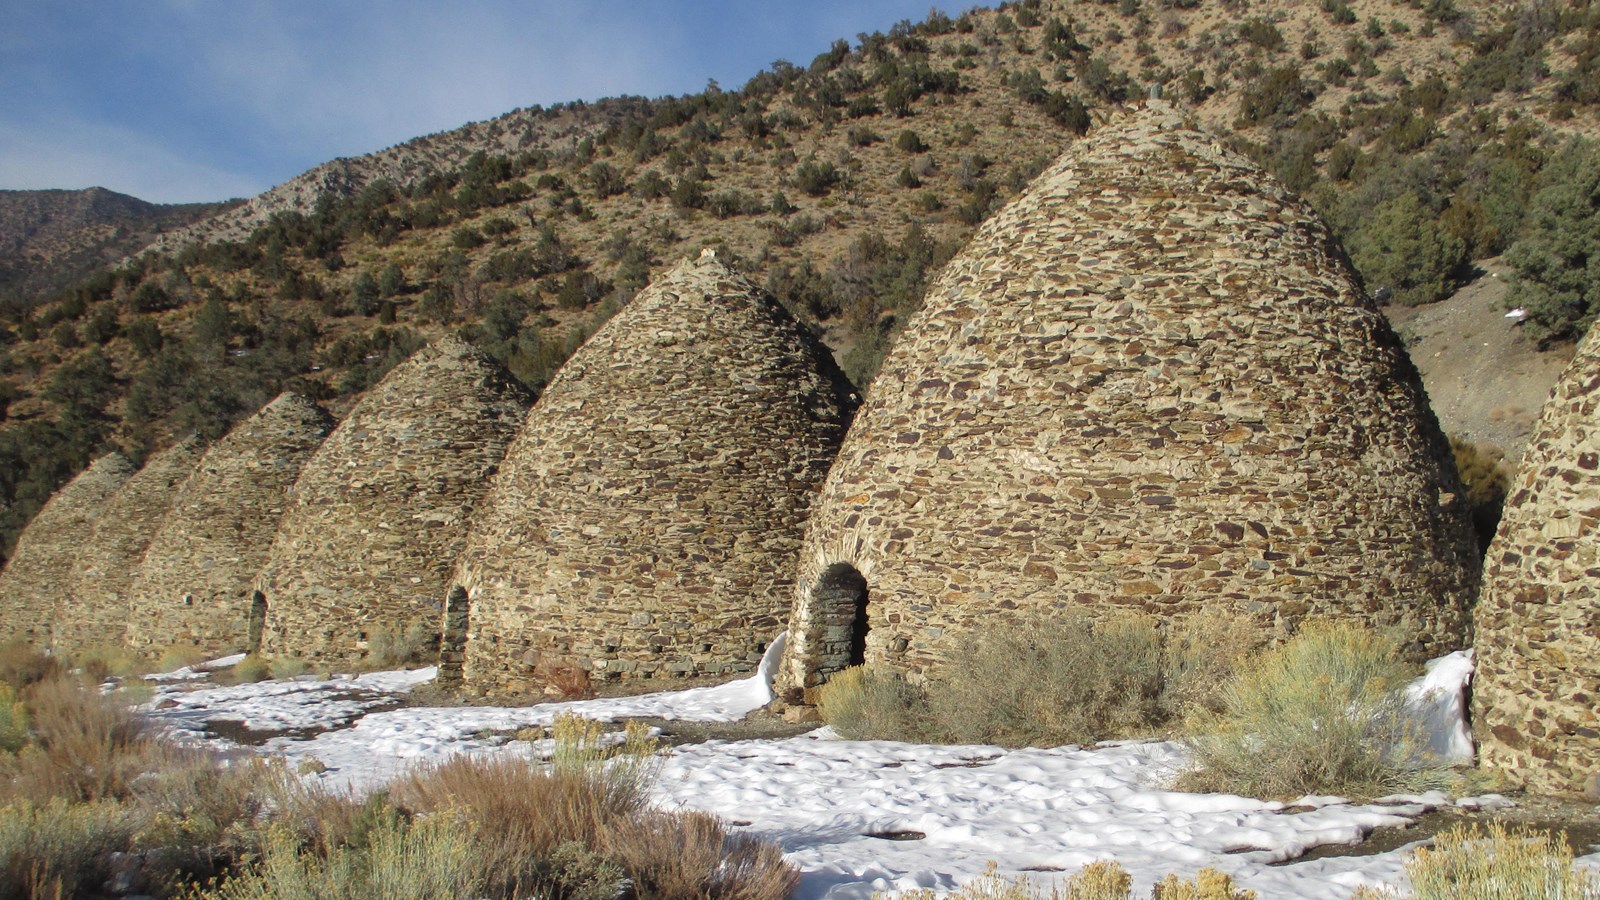 Stone and mortar beehive structures in a row in patchy snow.